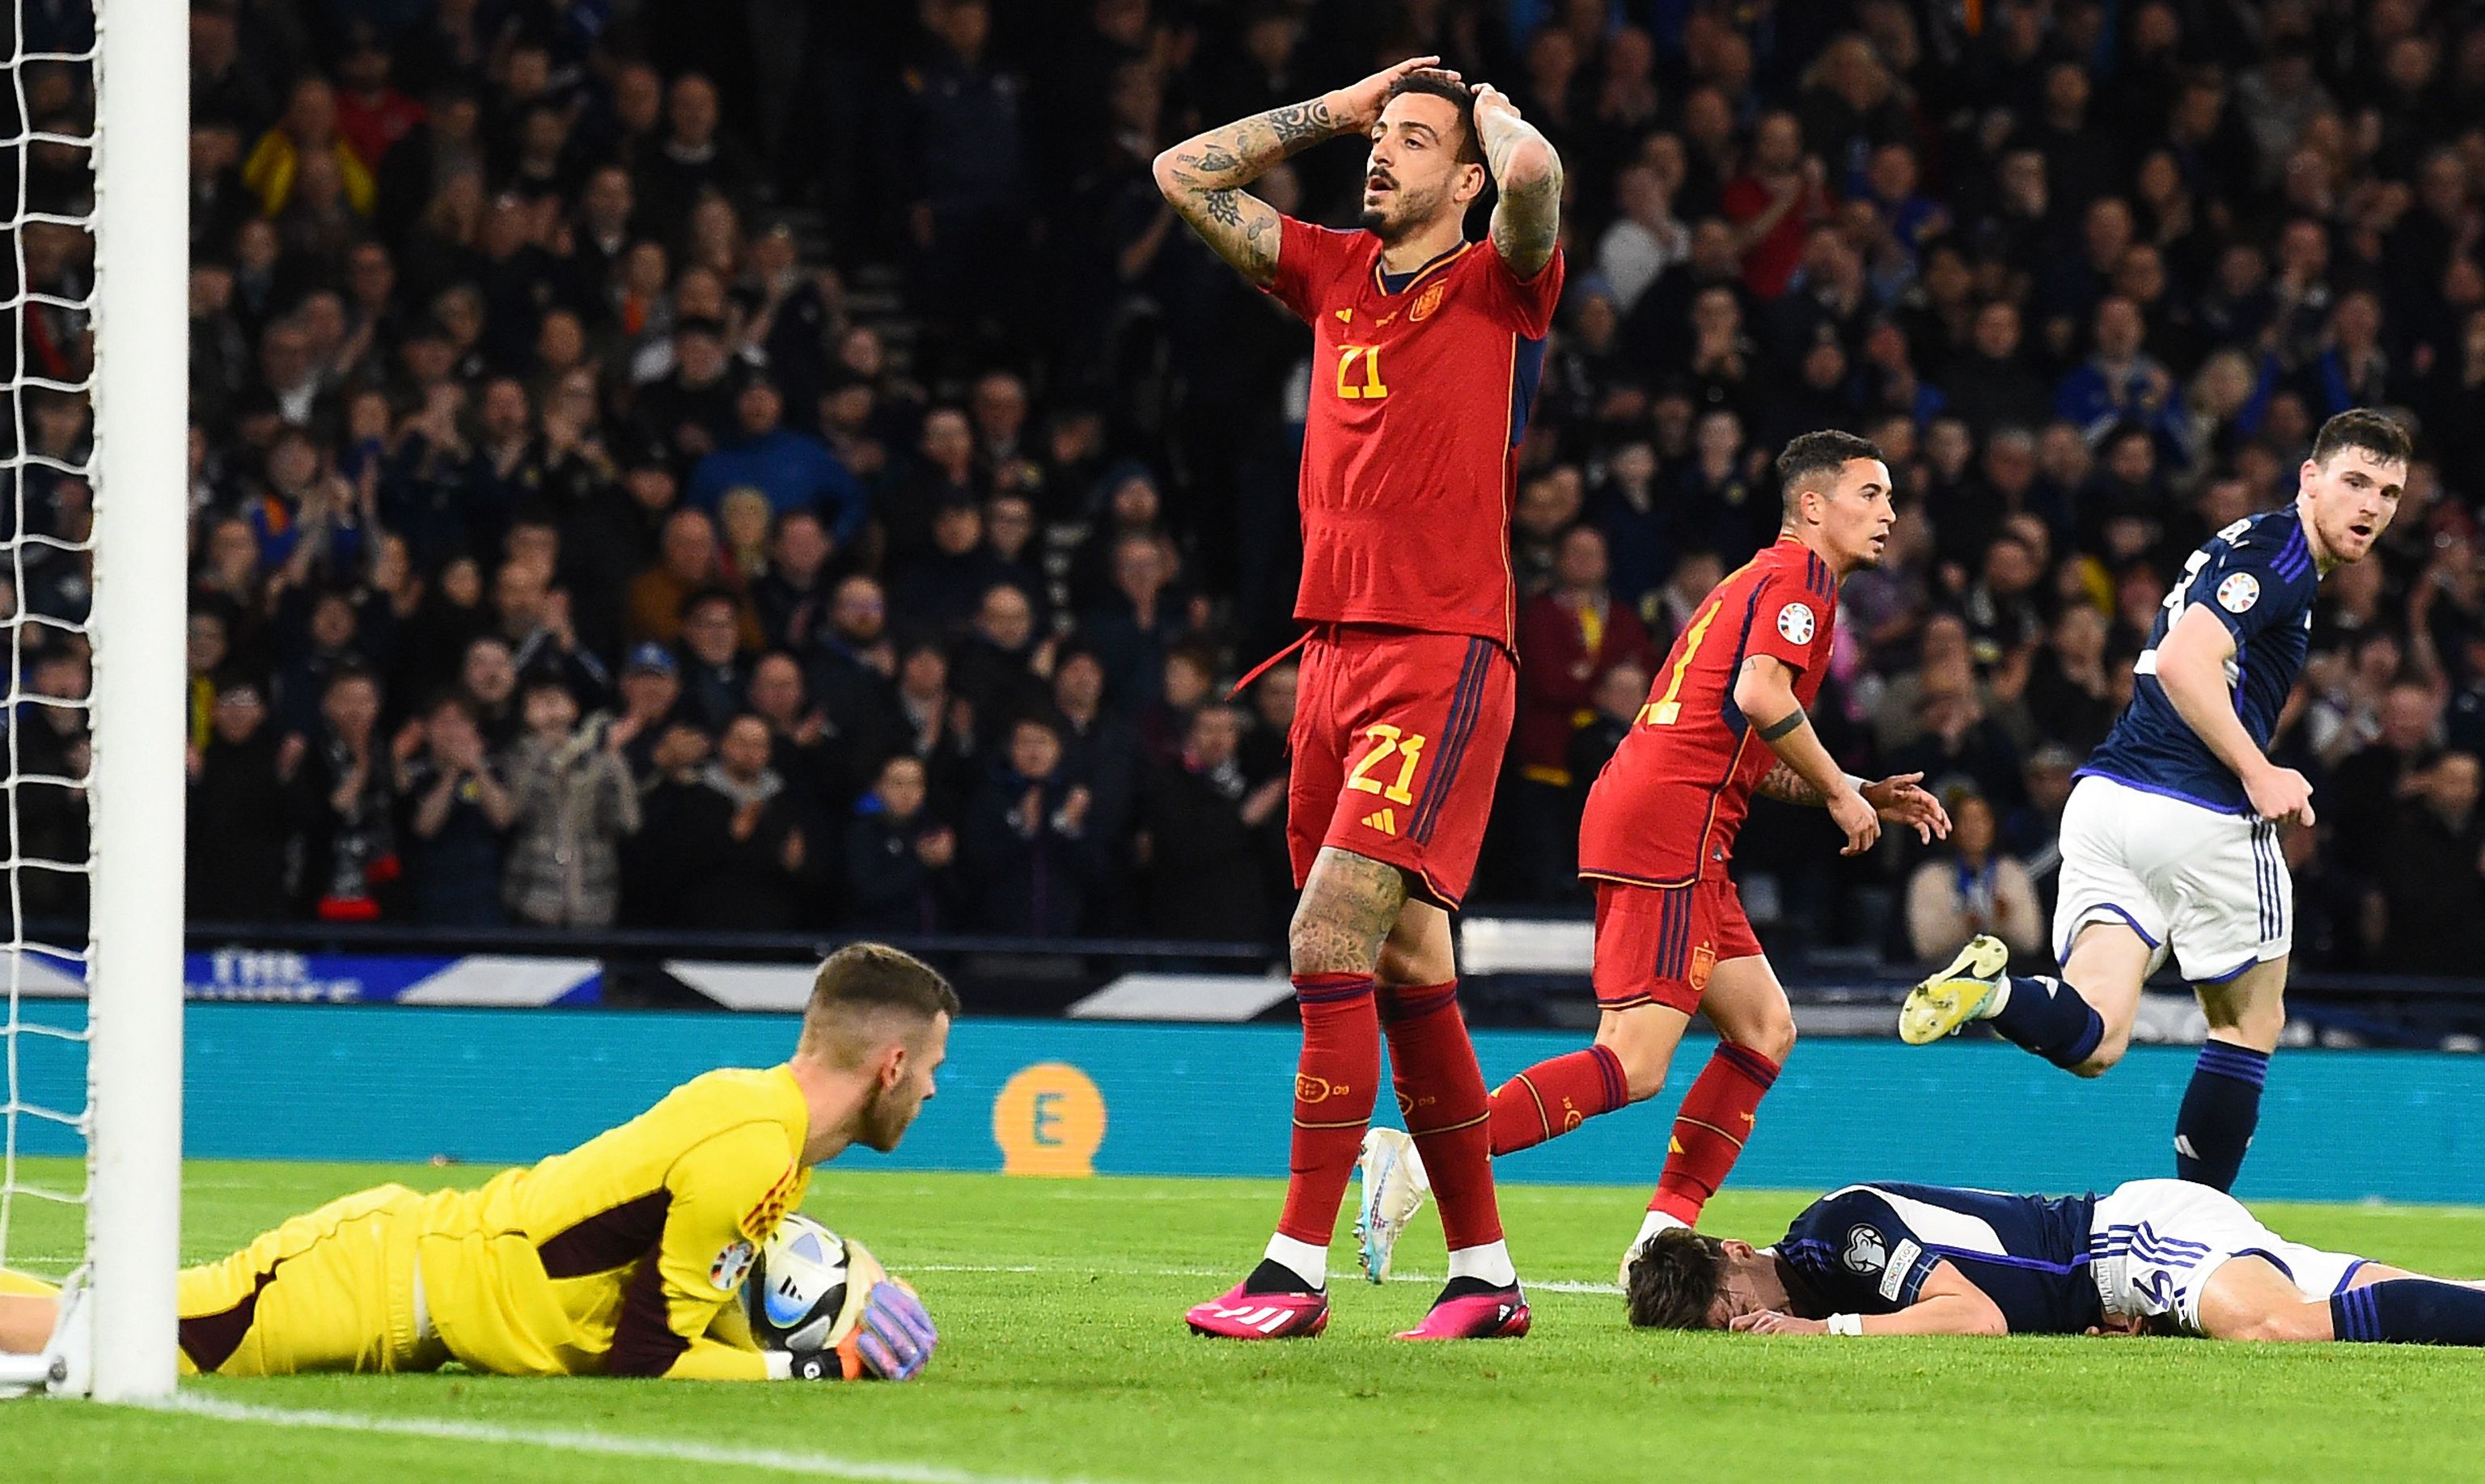 Spain's striker  lt;HIT gt;Joselu lt;/HIT gt; reacts as his header was saved by Scotland's goalkeeper Angus Gunn during the UEFA Euro 2024 group A qualification football match between Scotland and Spain at Hampden Park stadium in Glasgow, on March 28, 2023. (Photo by ANDY BUCHANAN / AFP)